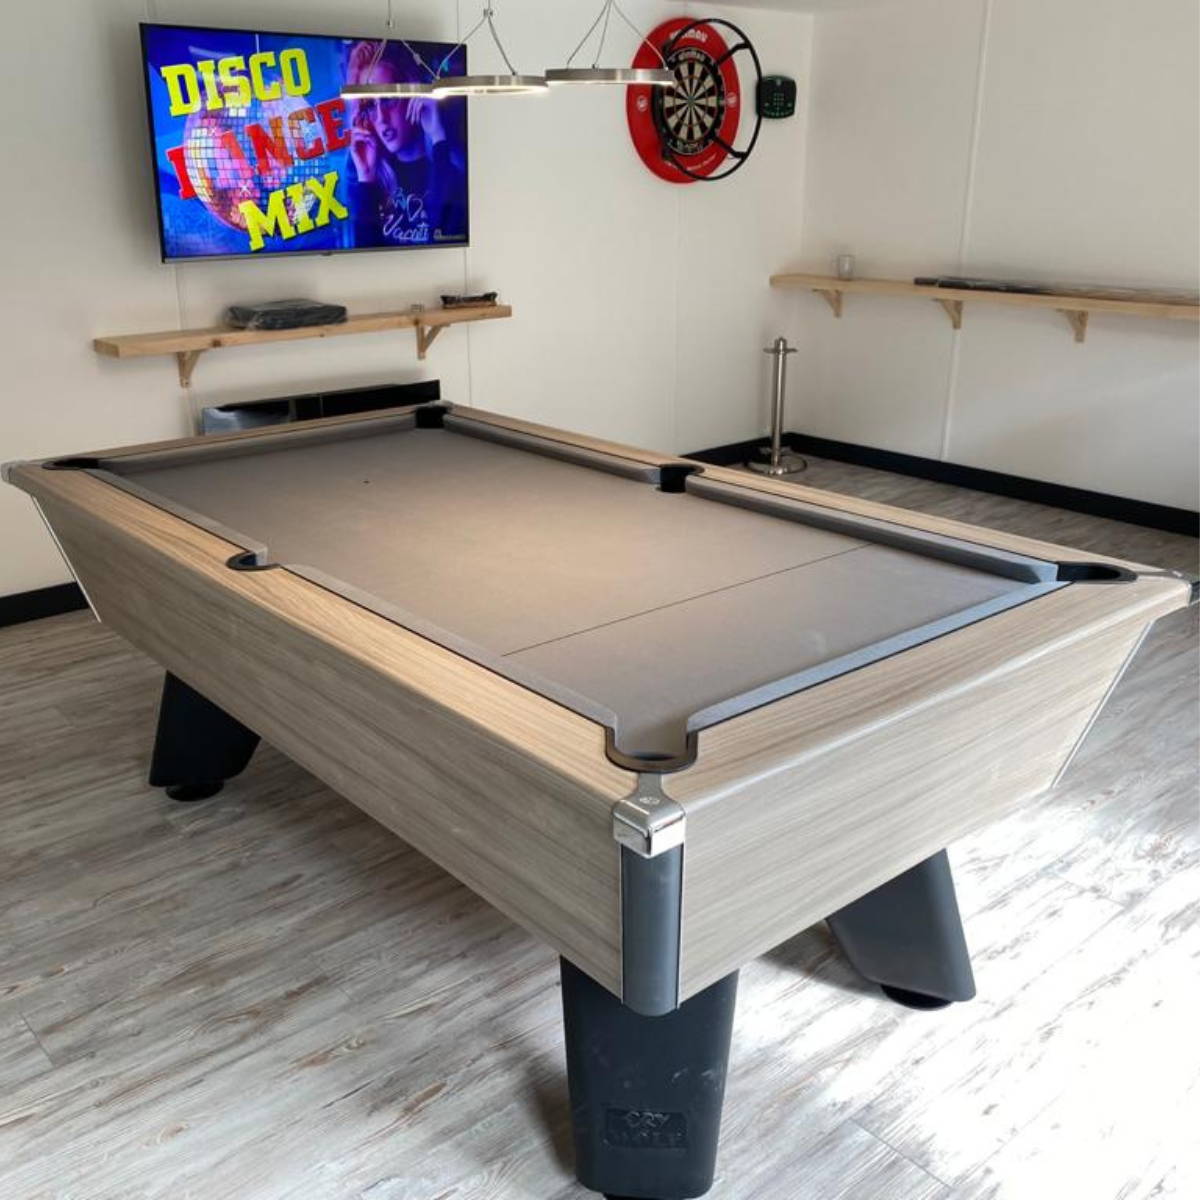 Cry Wolf Slate Bed Indoor Pool Table - Drift wood 1